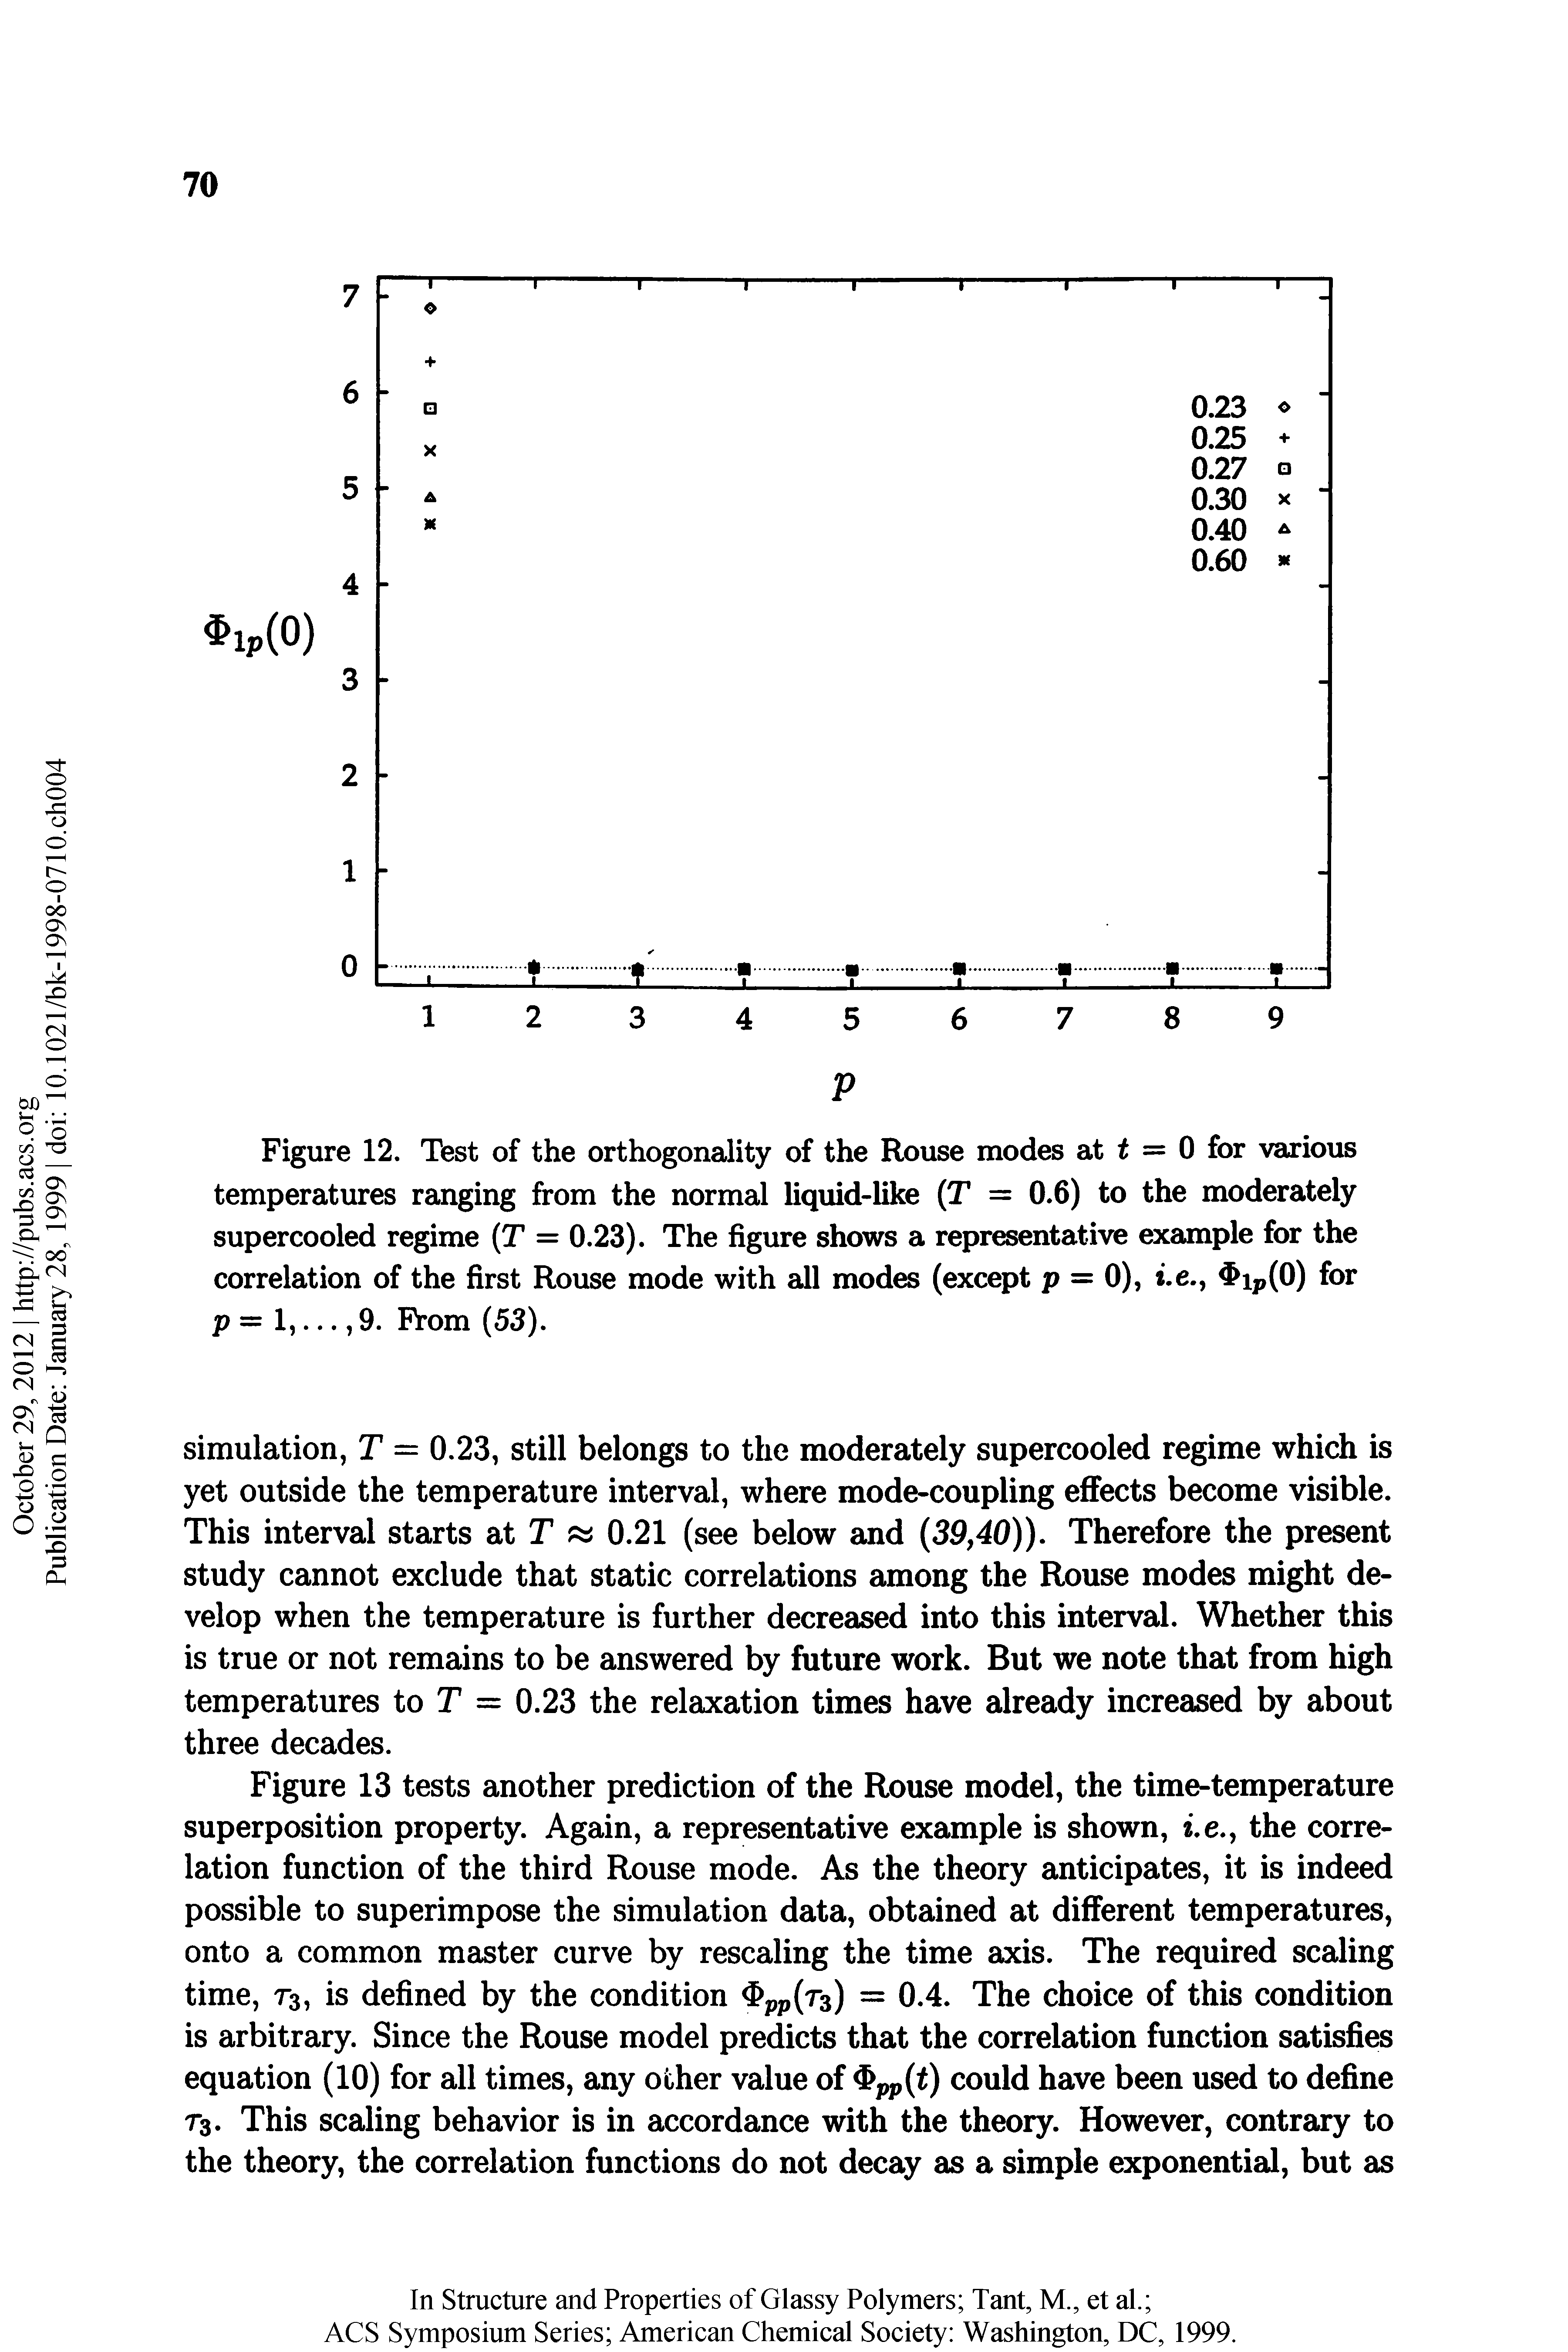 Figure 12. Test of the orthogonality of the Rouse modes at t = 0 for various temperatures ranging from the normal liquid>like (T = 0.6) to the moderately supercooled regime (T = 0.23). The figure shows a representative example for the correlation of the first Rouse mode with all modes (except p = 0), i.e., ip(O) for p = 1,..., 9. Prom (53).